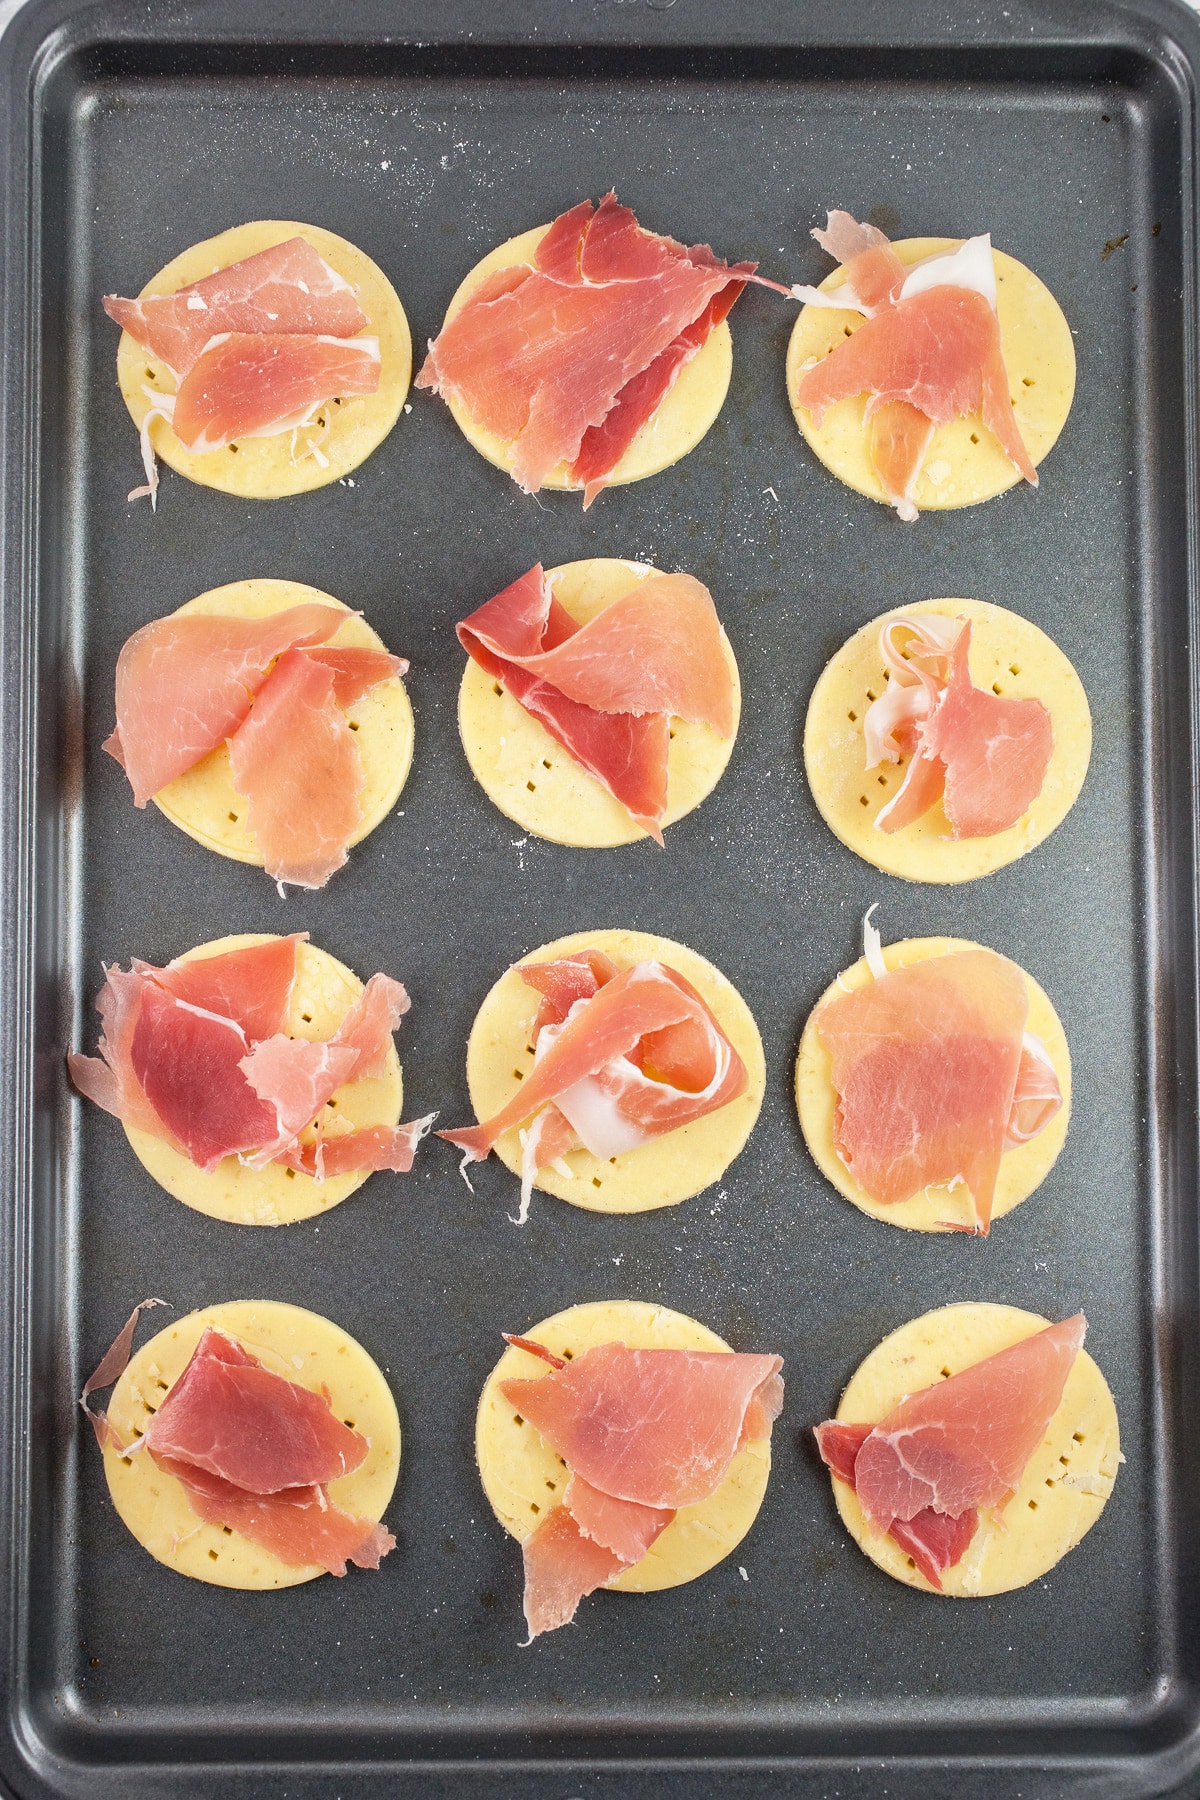 Puff pastry rounds with prosciutto on baking sheet.